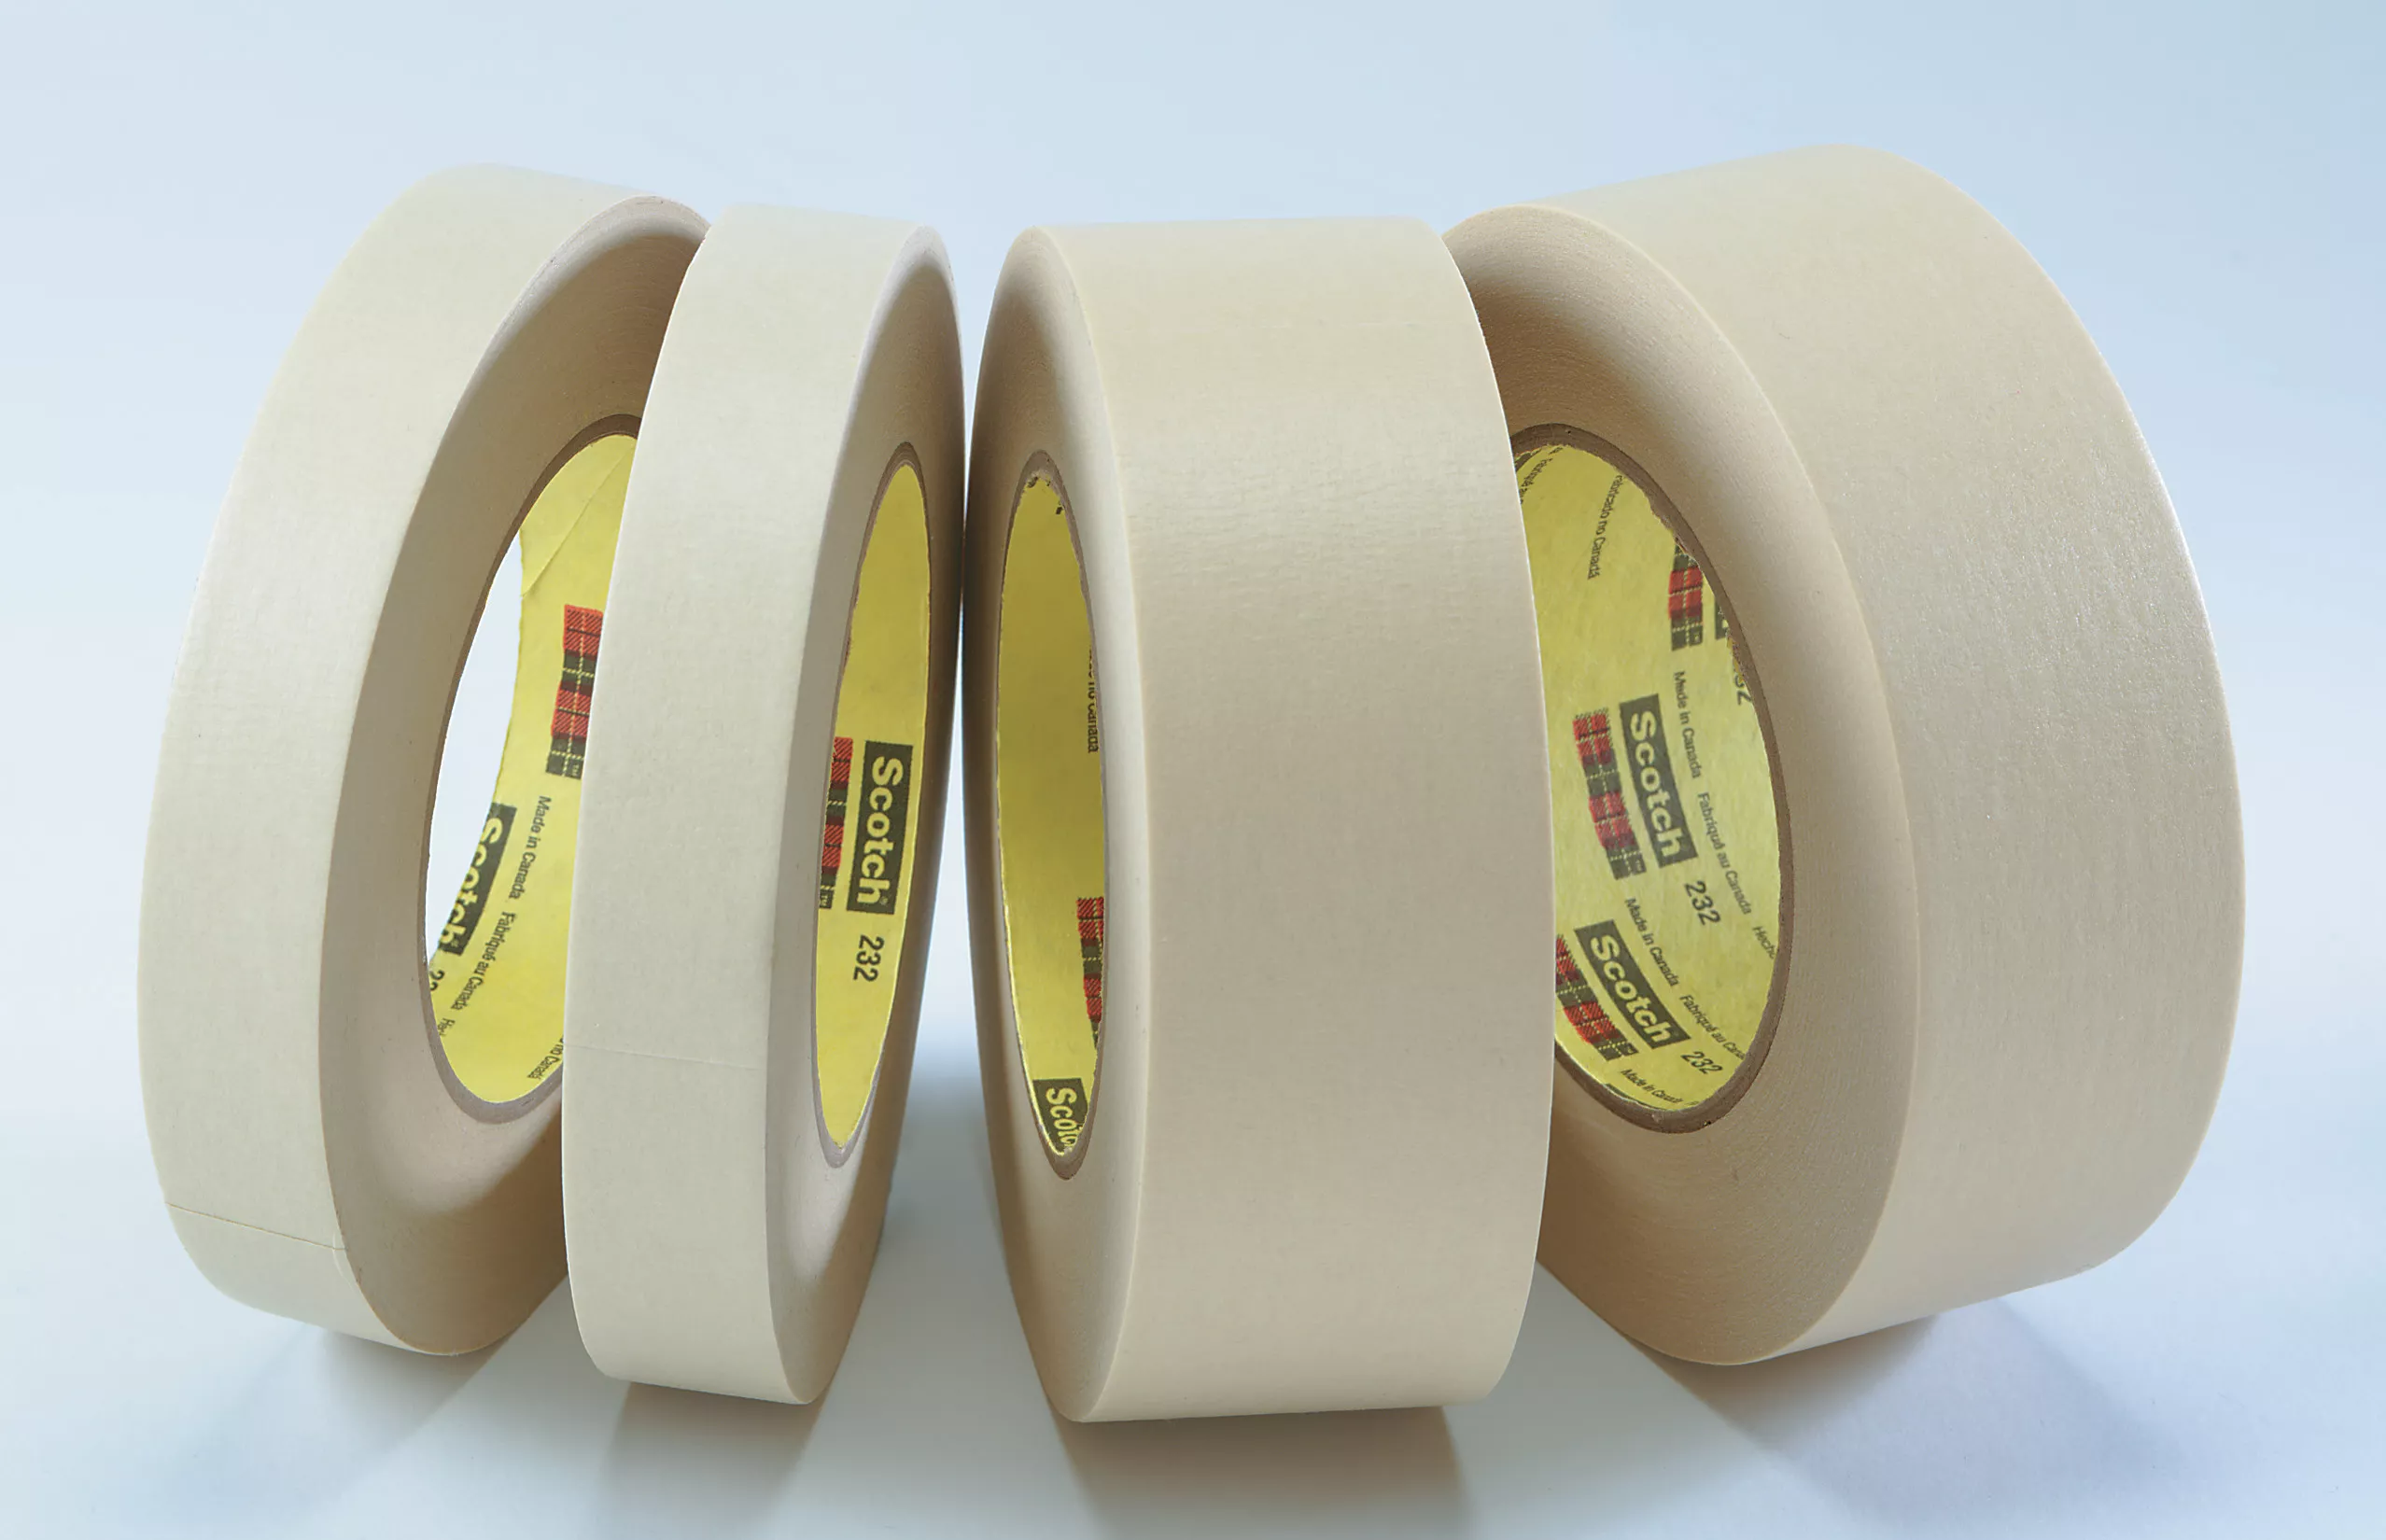 3M™ High Performance Masking Tape 232, Tan, 12 in x 60 yd, 6.3 mil, 4
Roll/Case